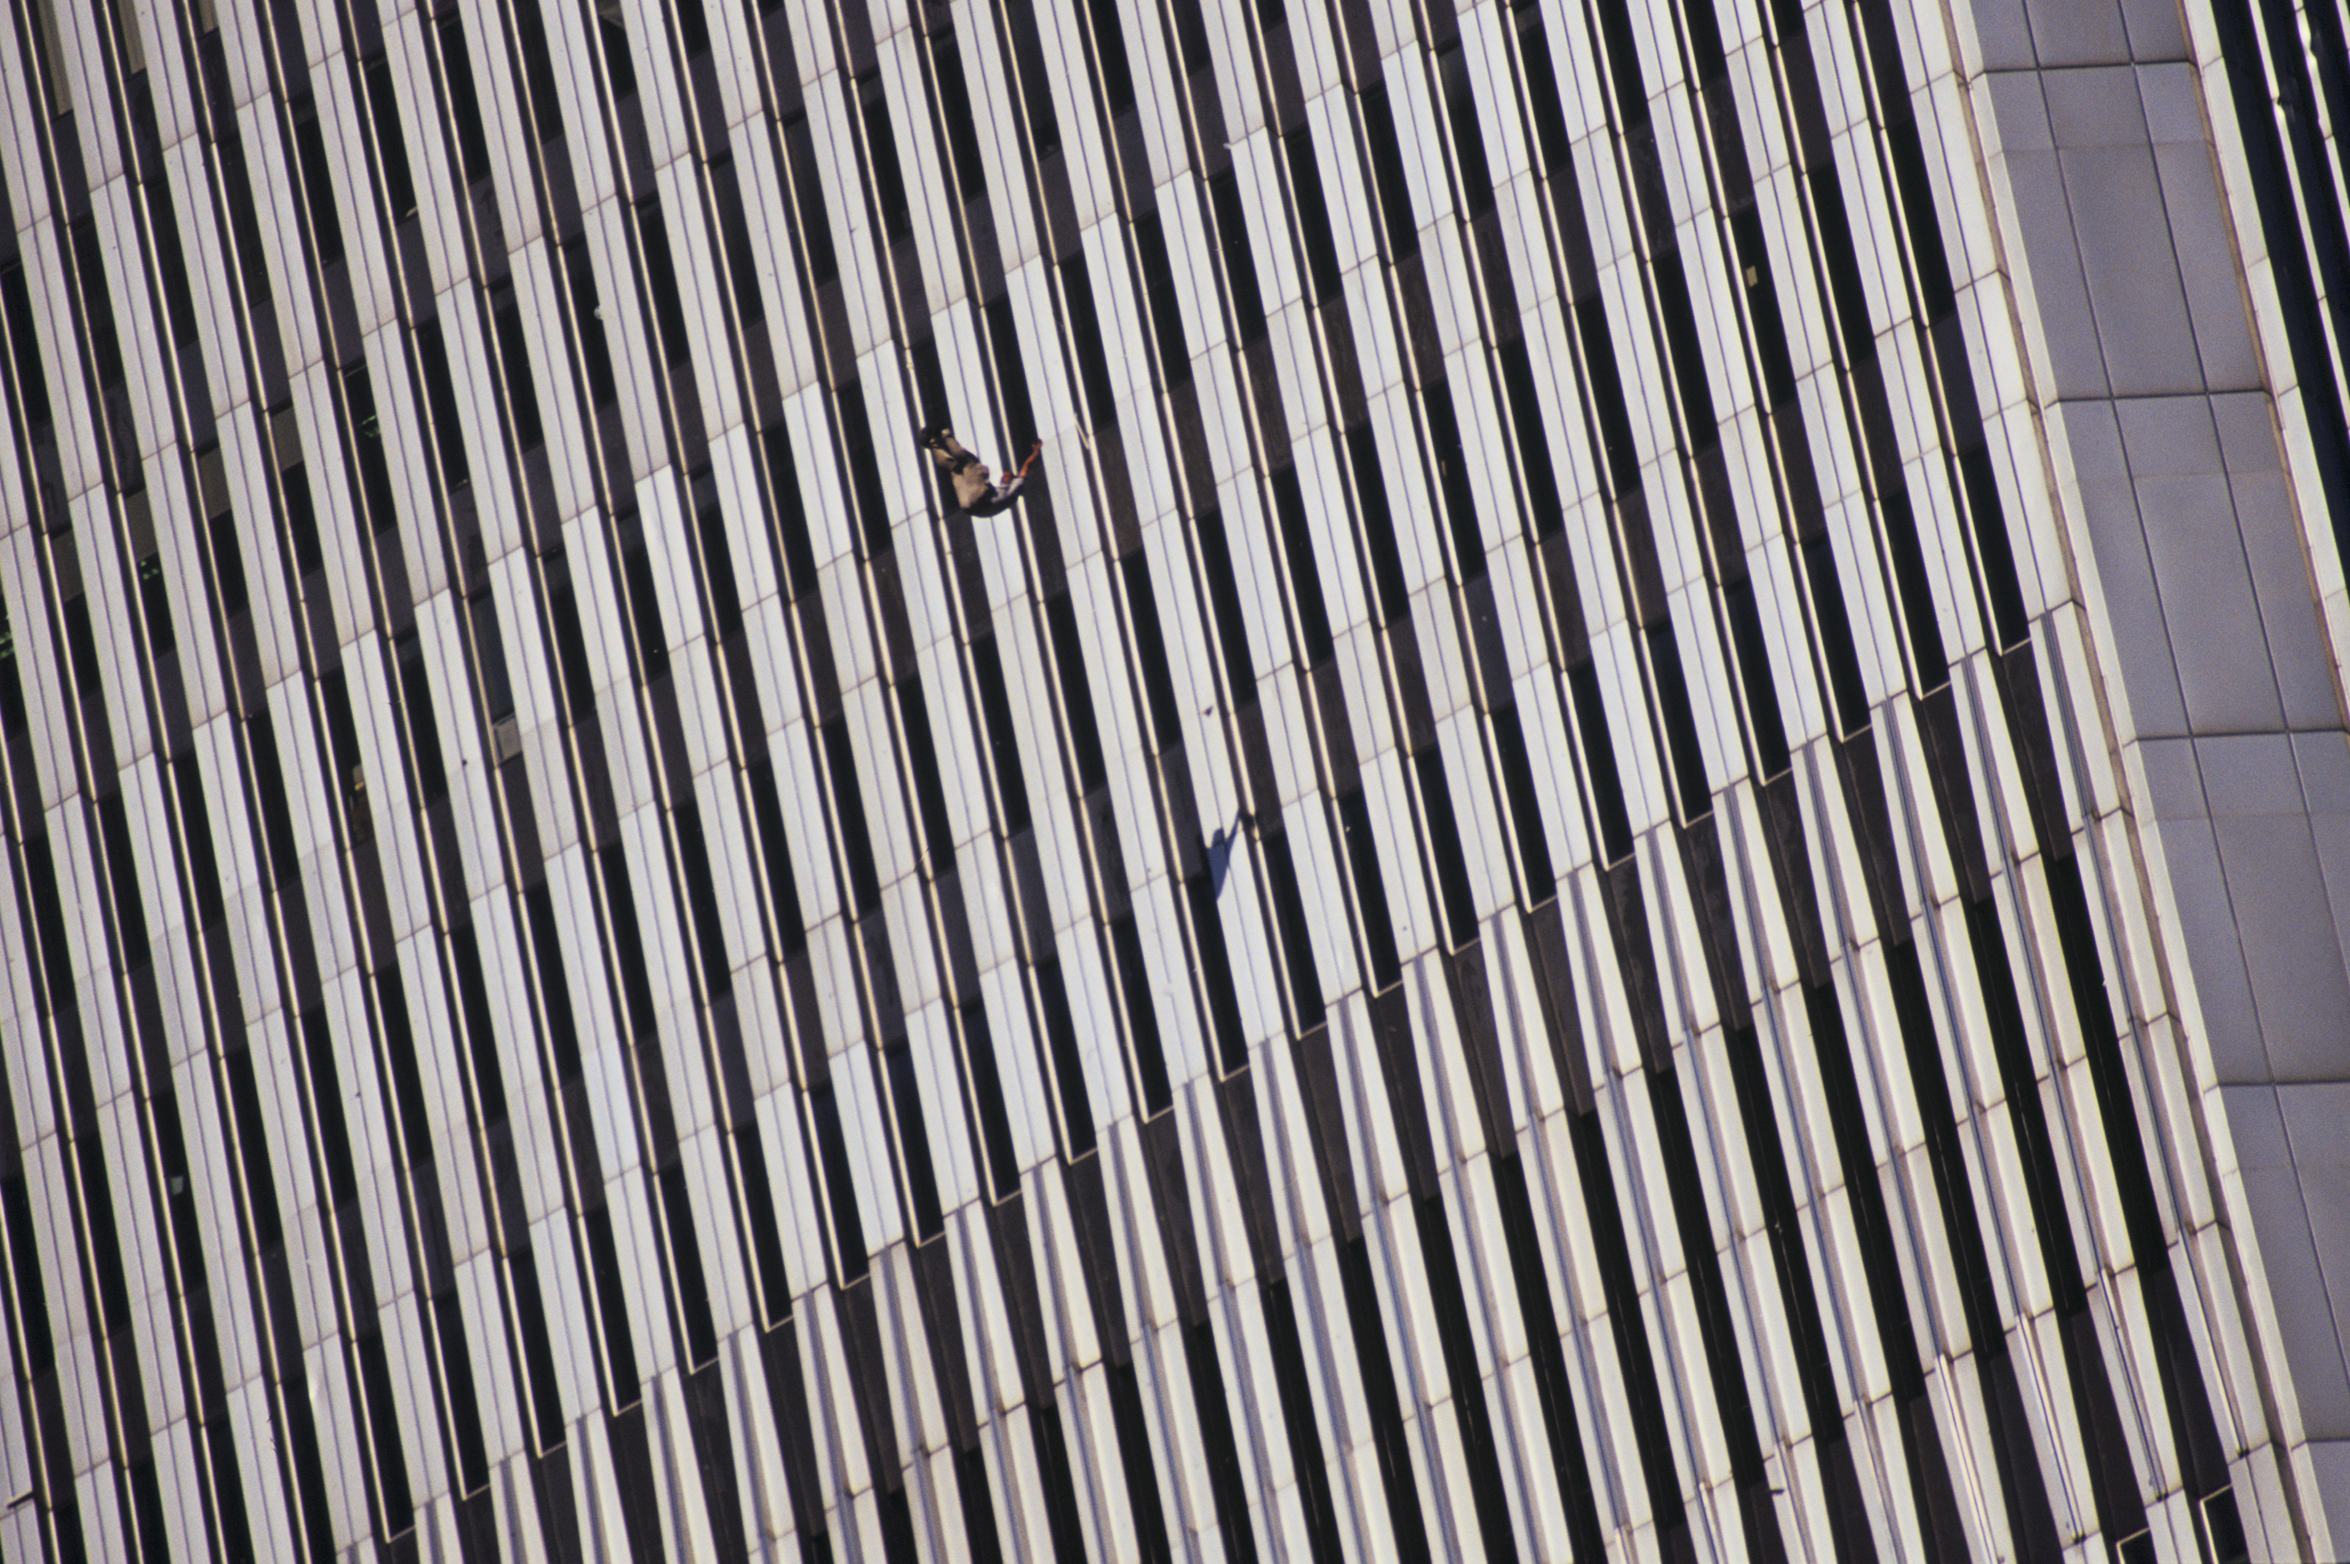 A victim falls from the World Trade Center, on Sept. 11, 2001.